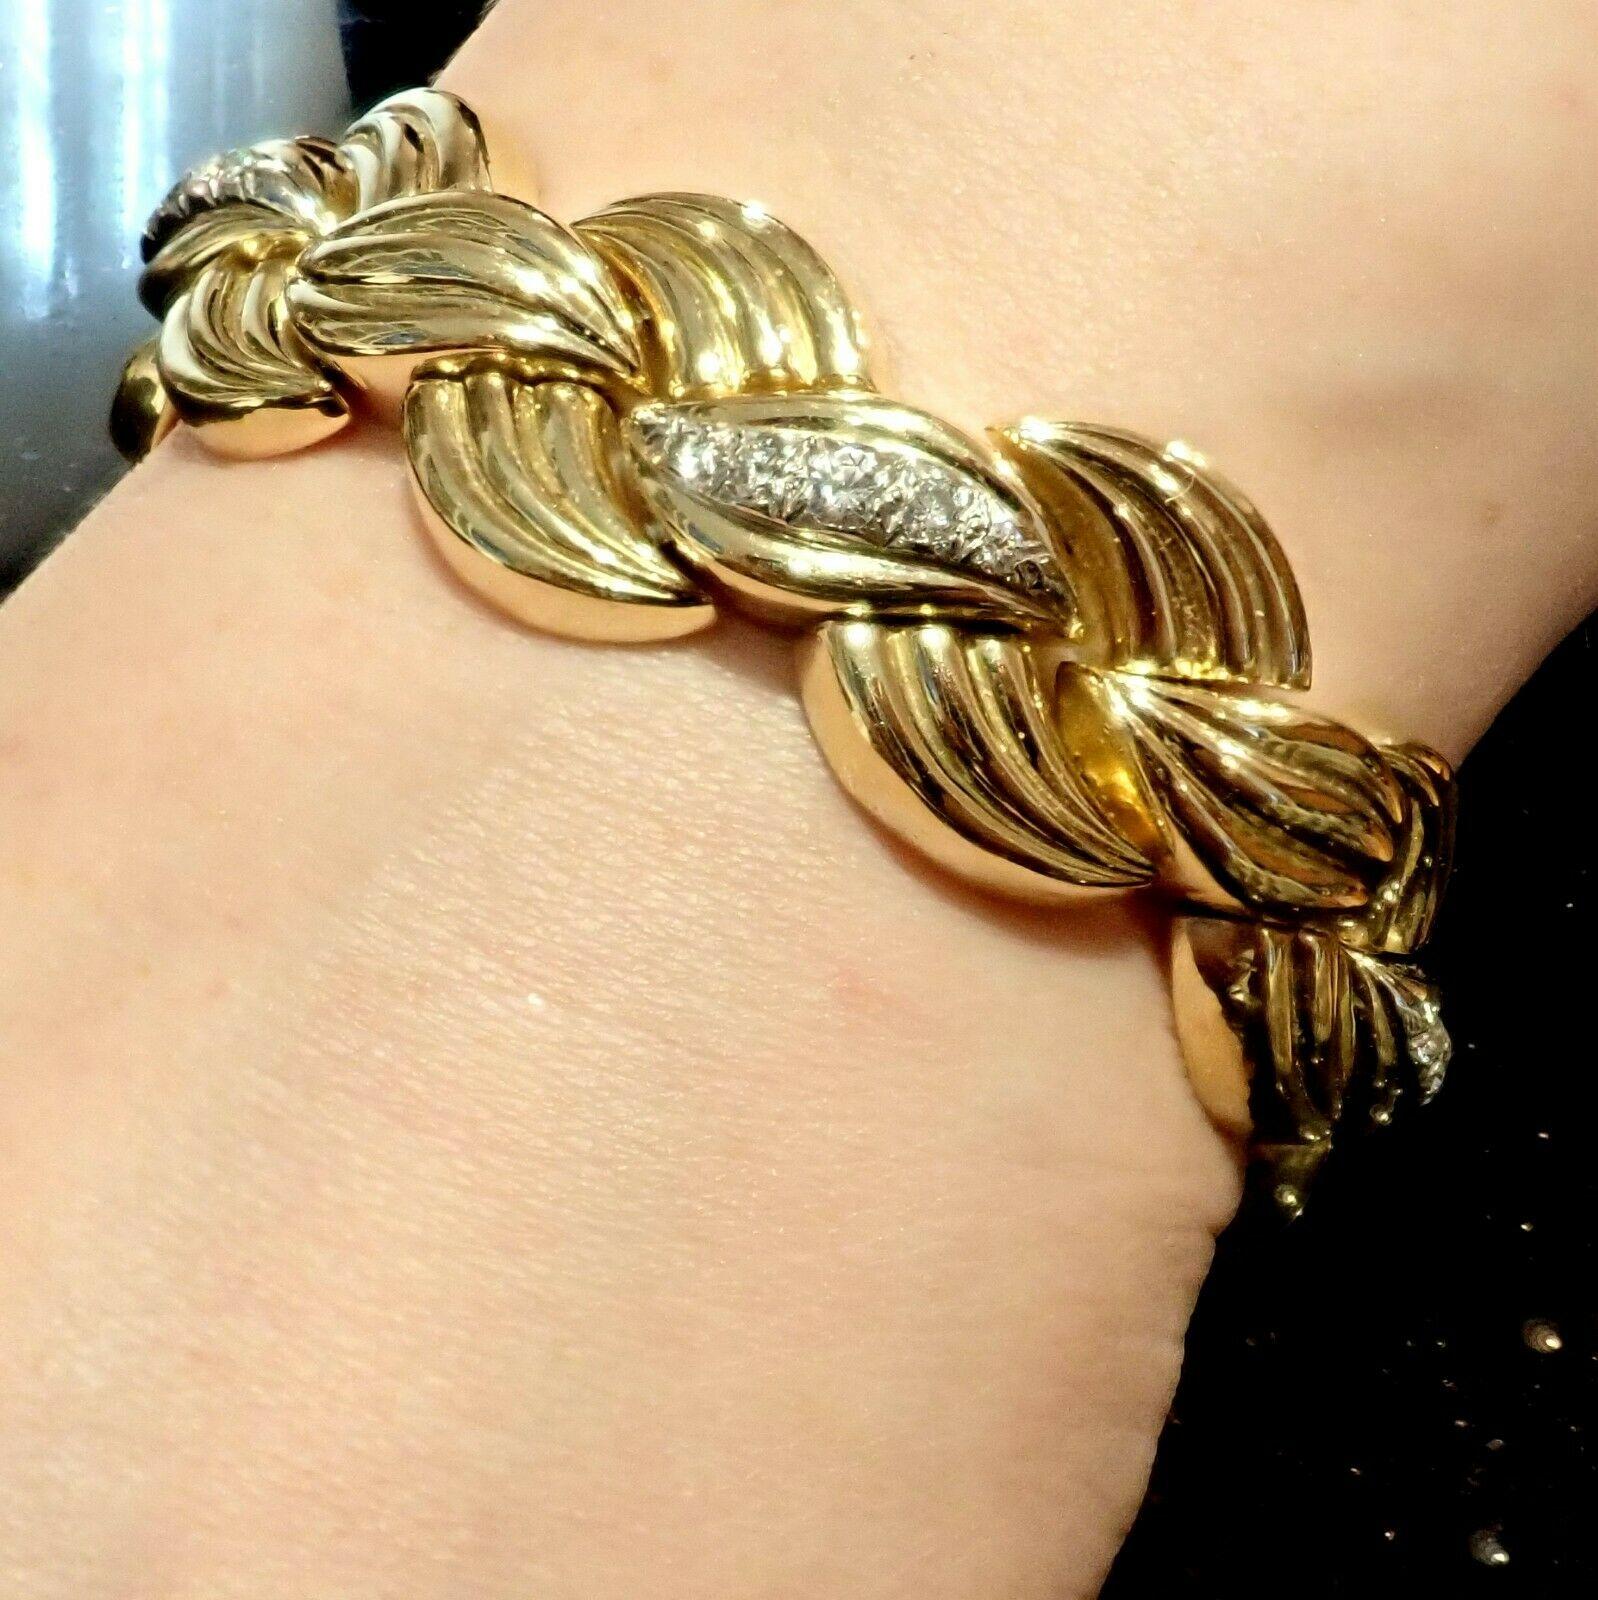 Vintage Van Cleef & Arpels Diamond Link Yellow Gold Bracelet In Excellent Condition For Sale In Holland, PA